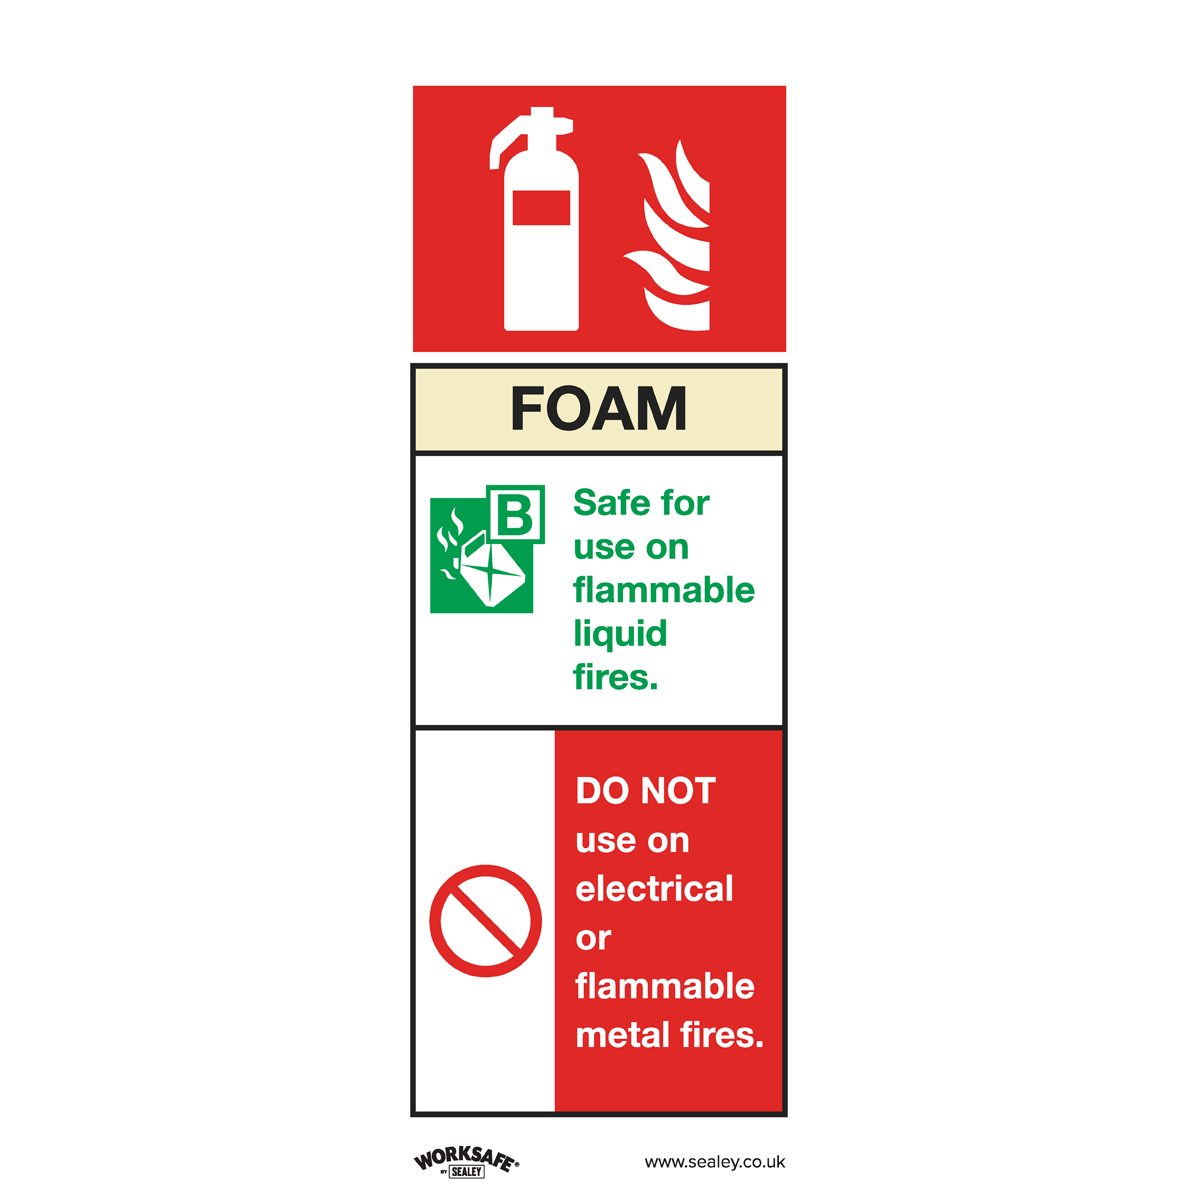 Sealey Safe Conditions Safety Sign - Foam Fire Extinguisher - Self-Adhesive Vinyl - Pack of 10